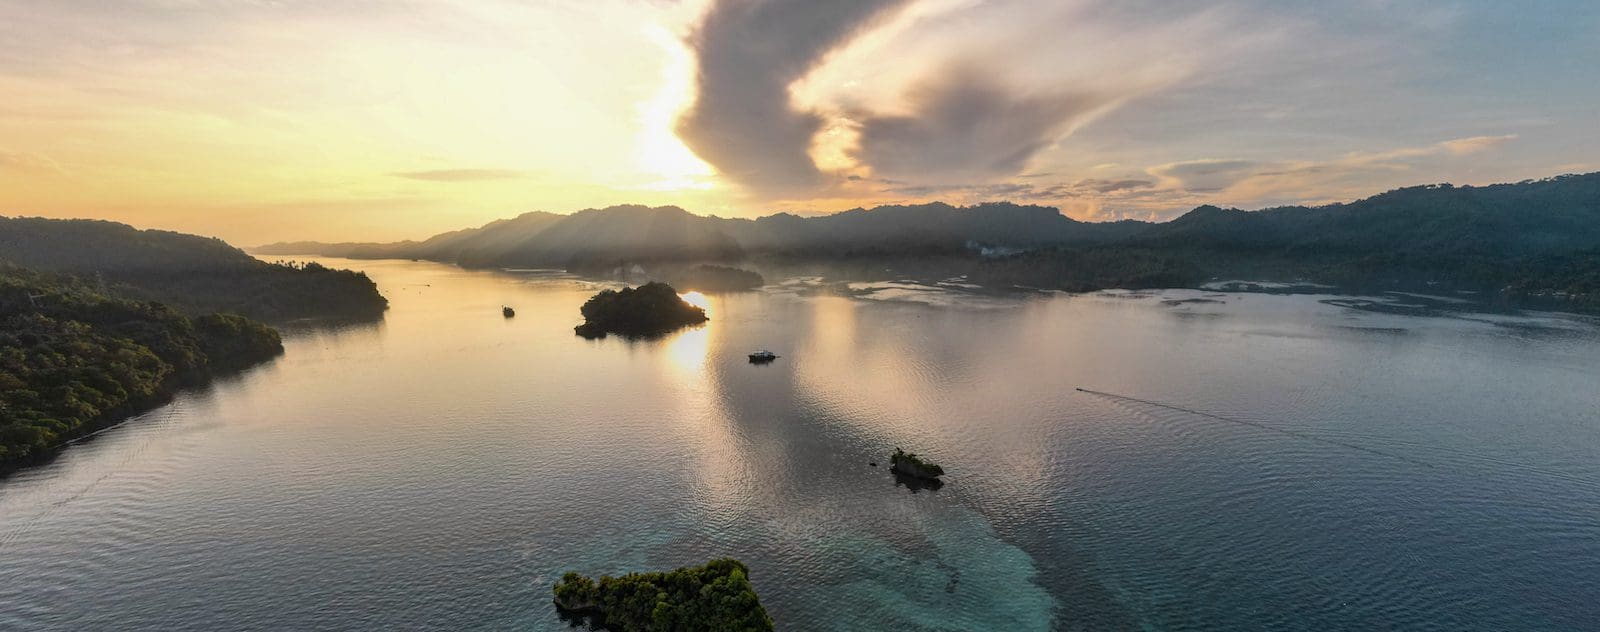 Landscape at Lembeh, Indonesia